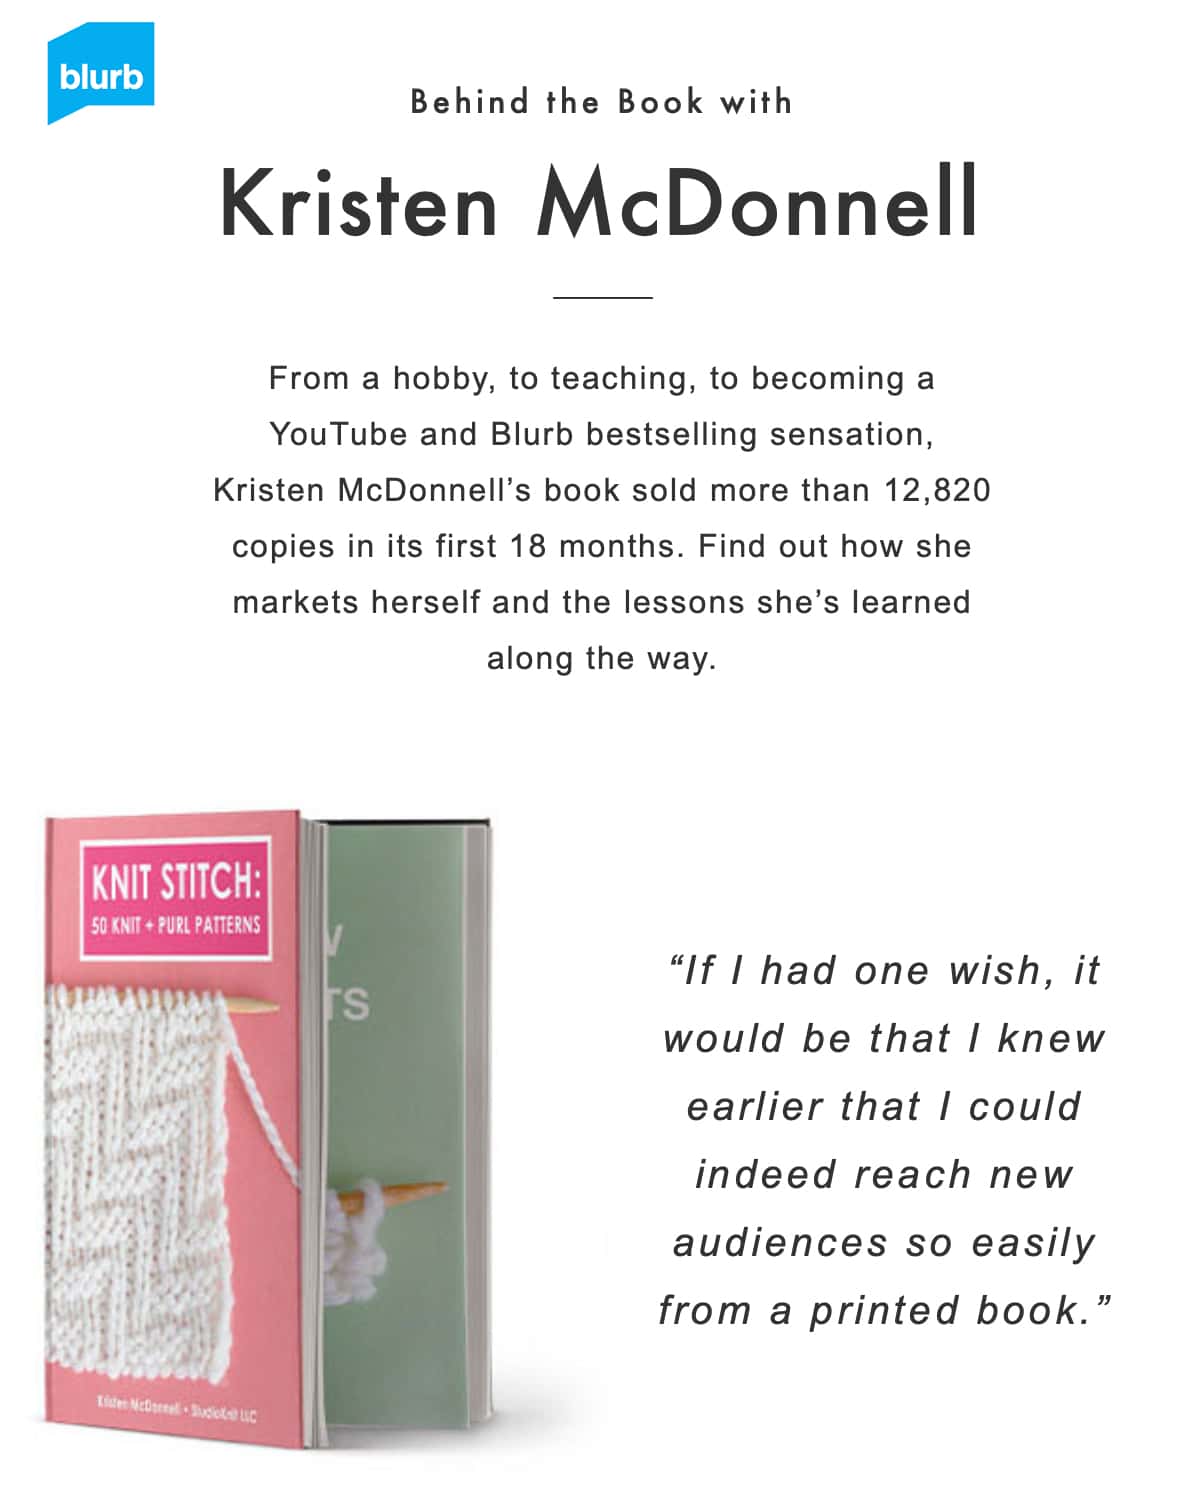 Behind the Book with Kristen McDonnell featured in Blurb Book's article.